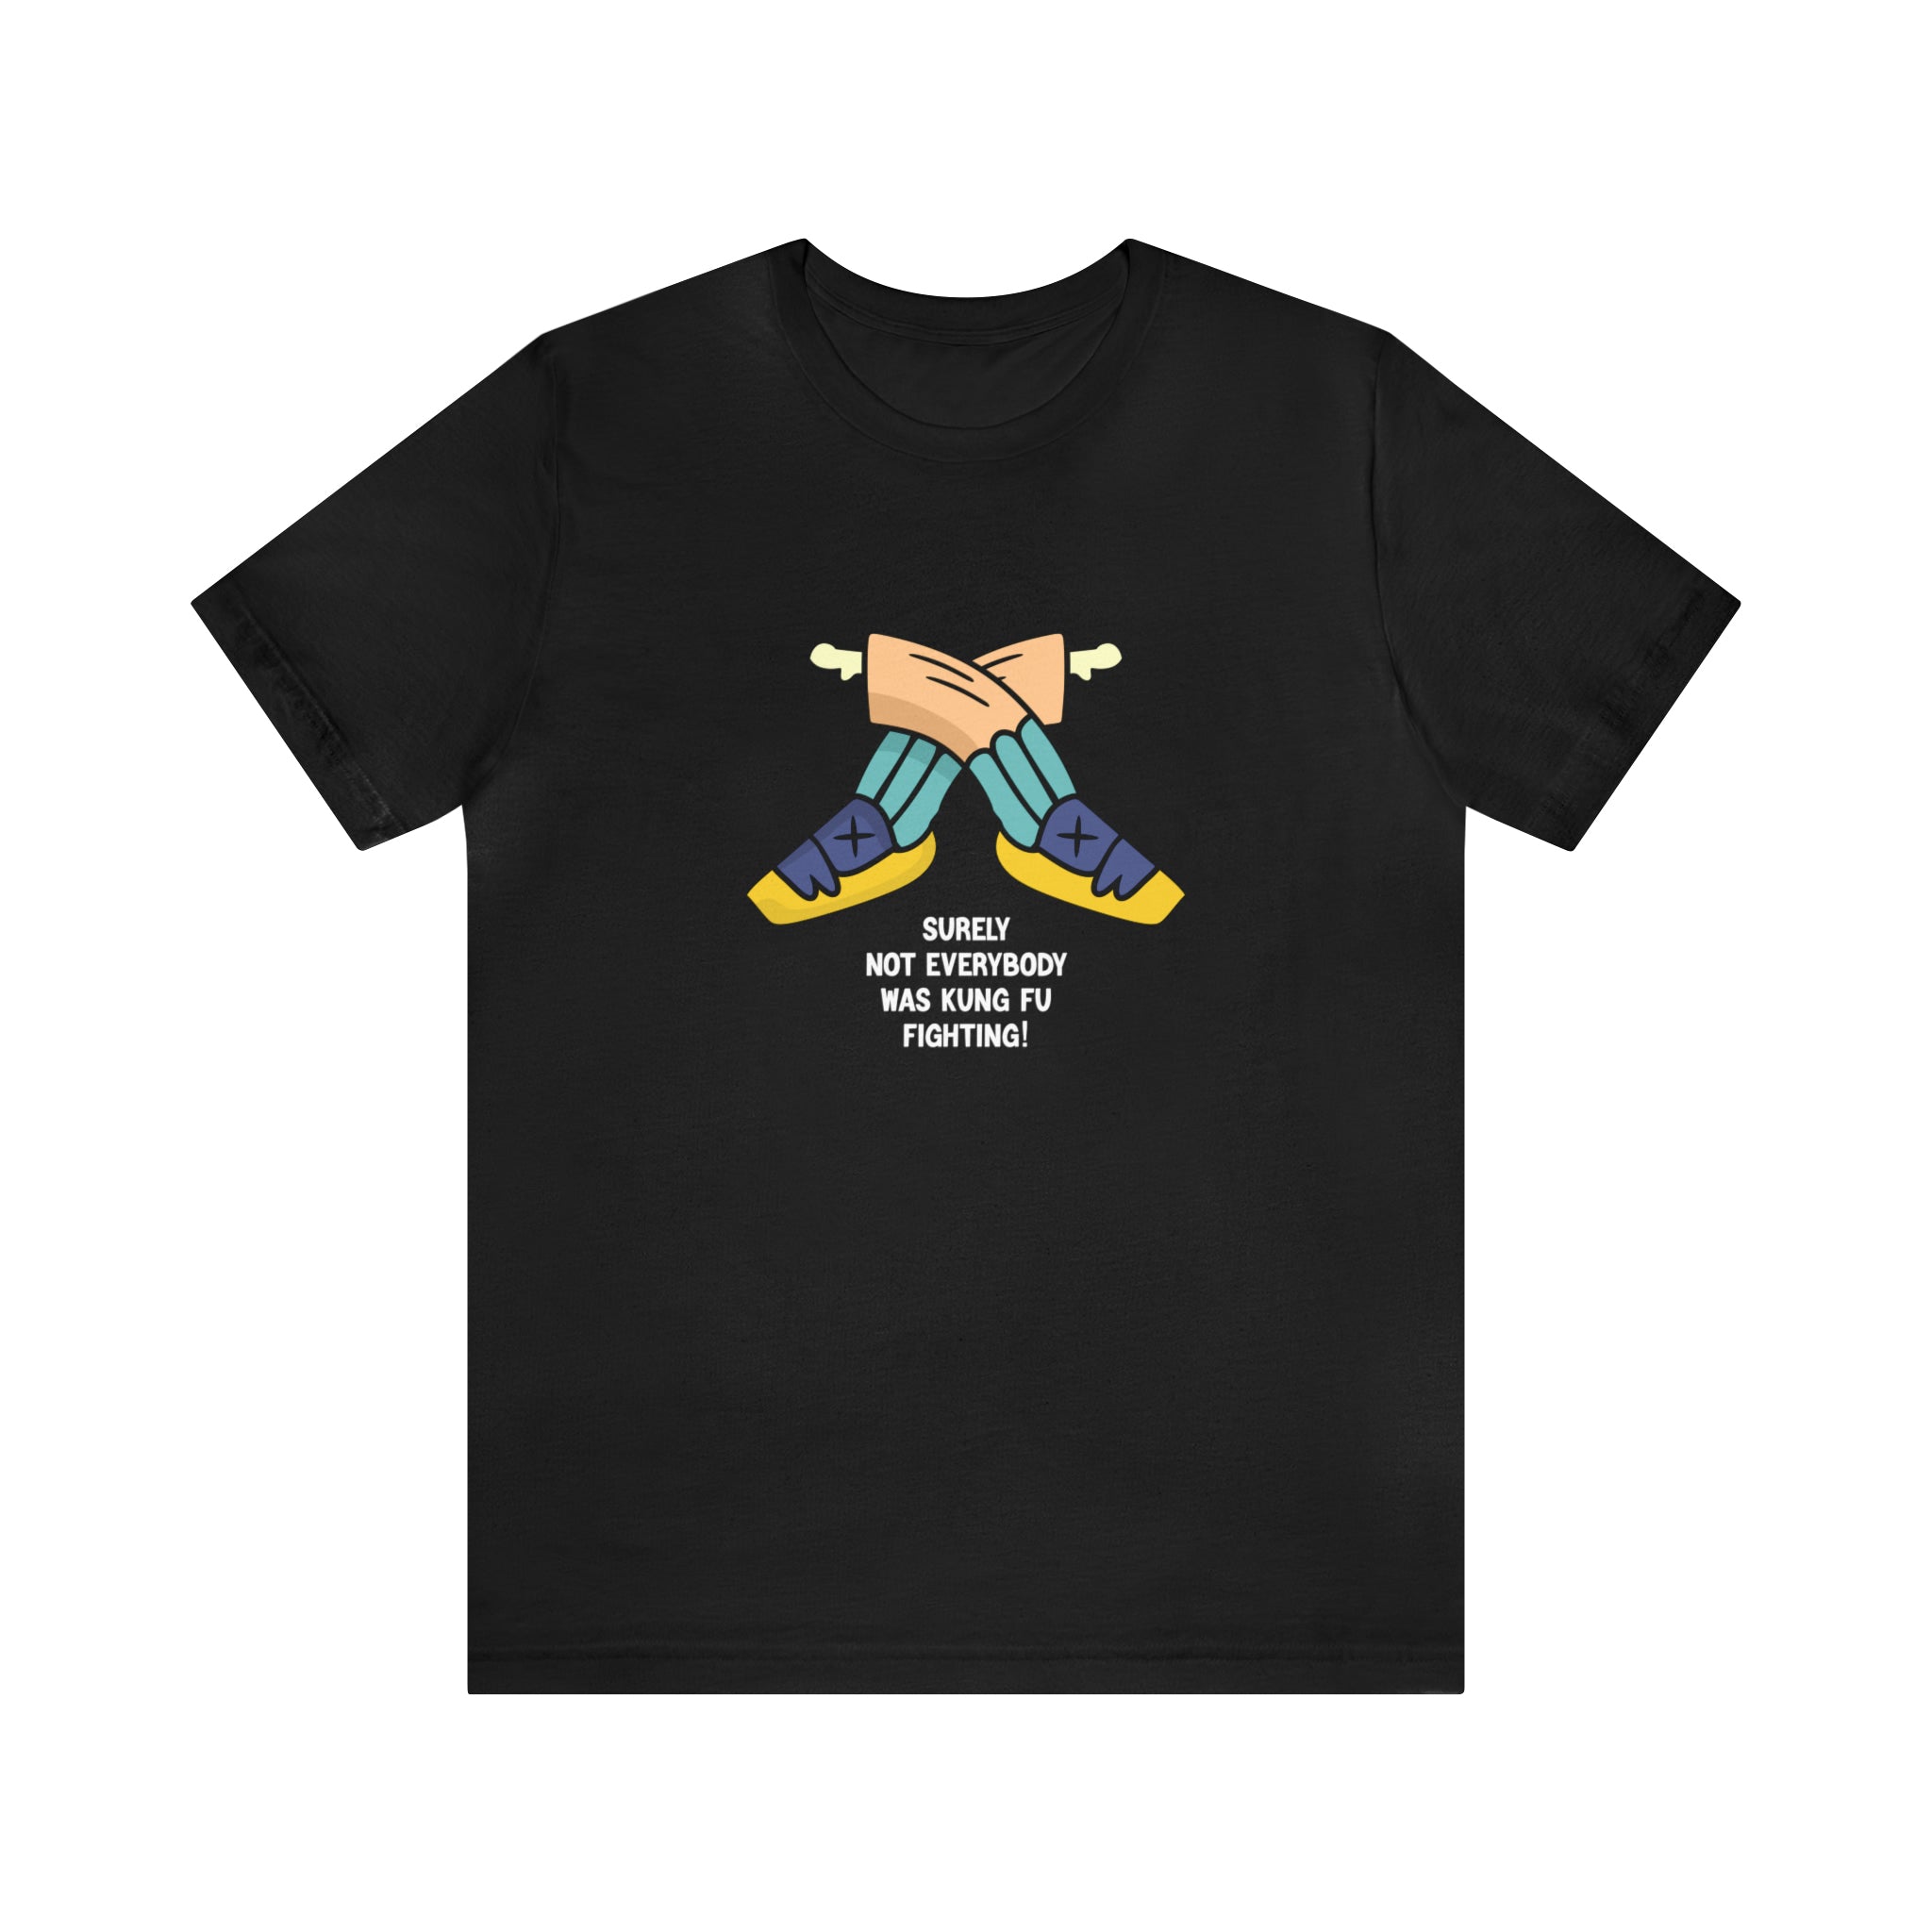 A Not Everybody Was Kung Fu Fighting-themed black t-shirt with a graphic design.